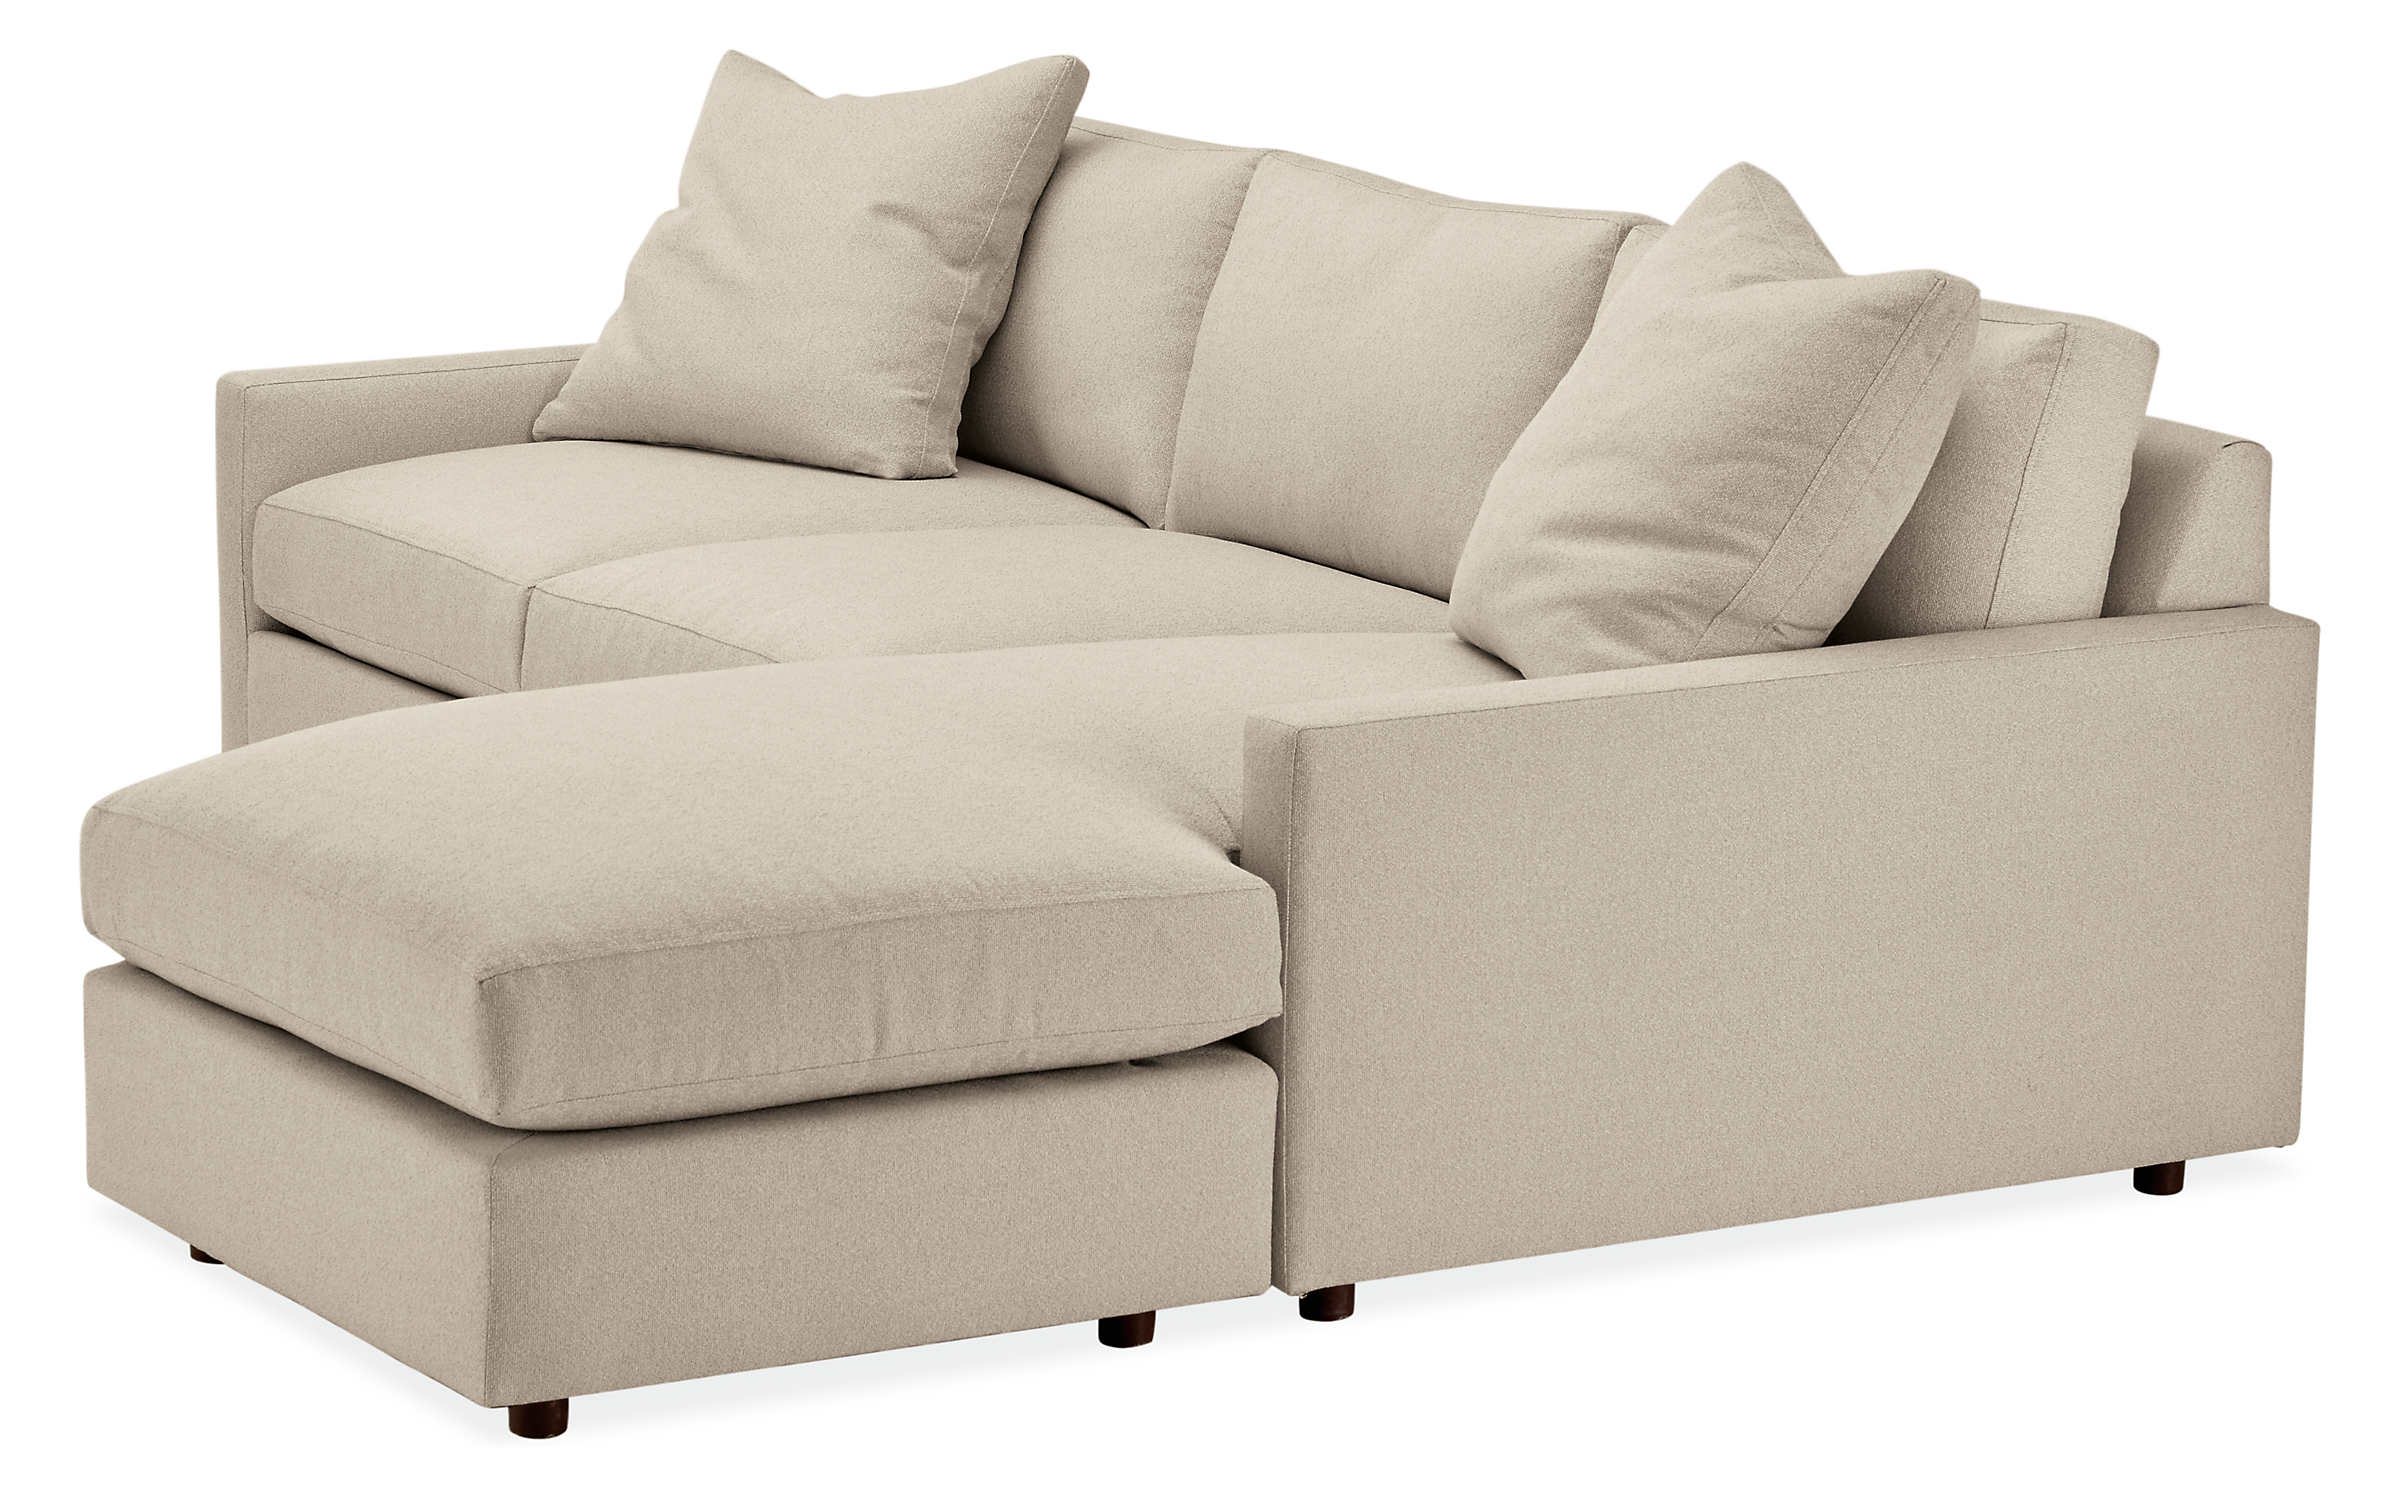 Detail of Linger Deep 91-wide Sofa with Reversible Chaise in Boyer Oatmeal Fabric.